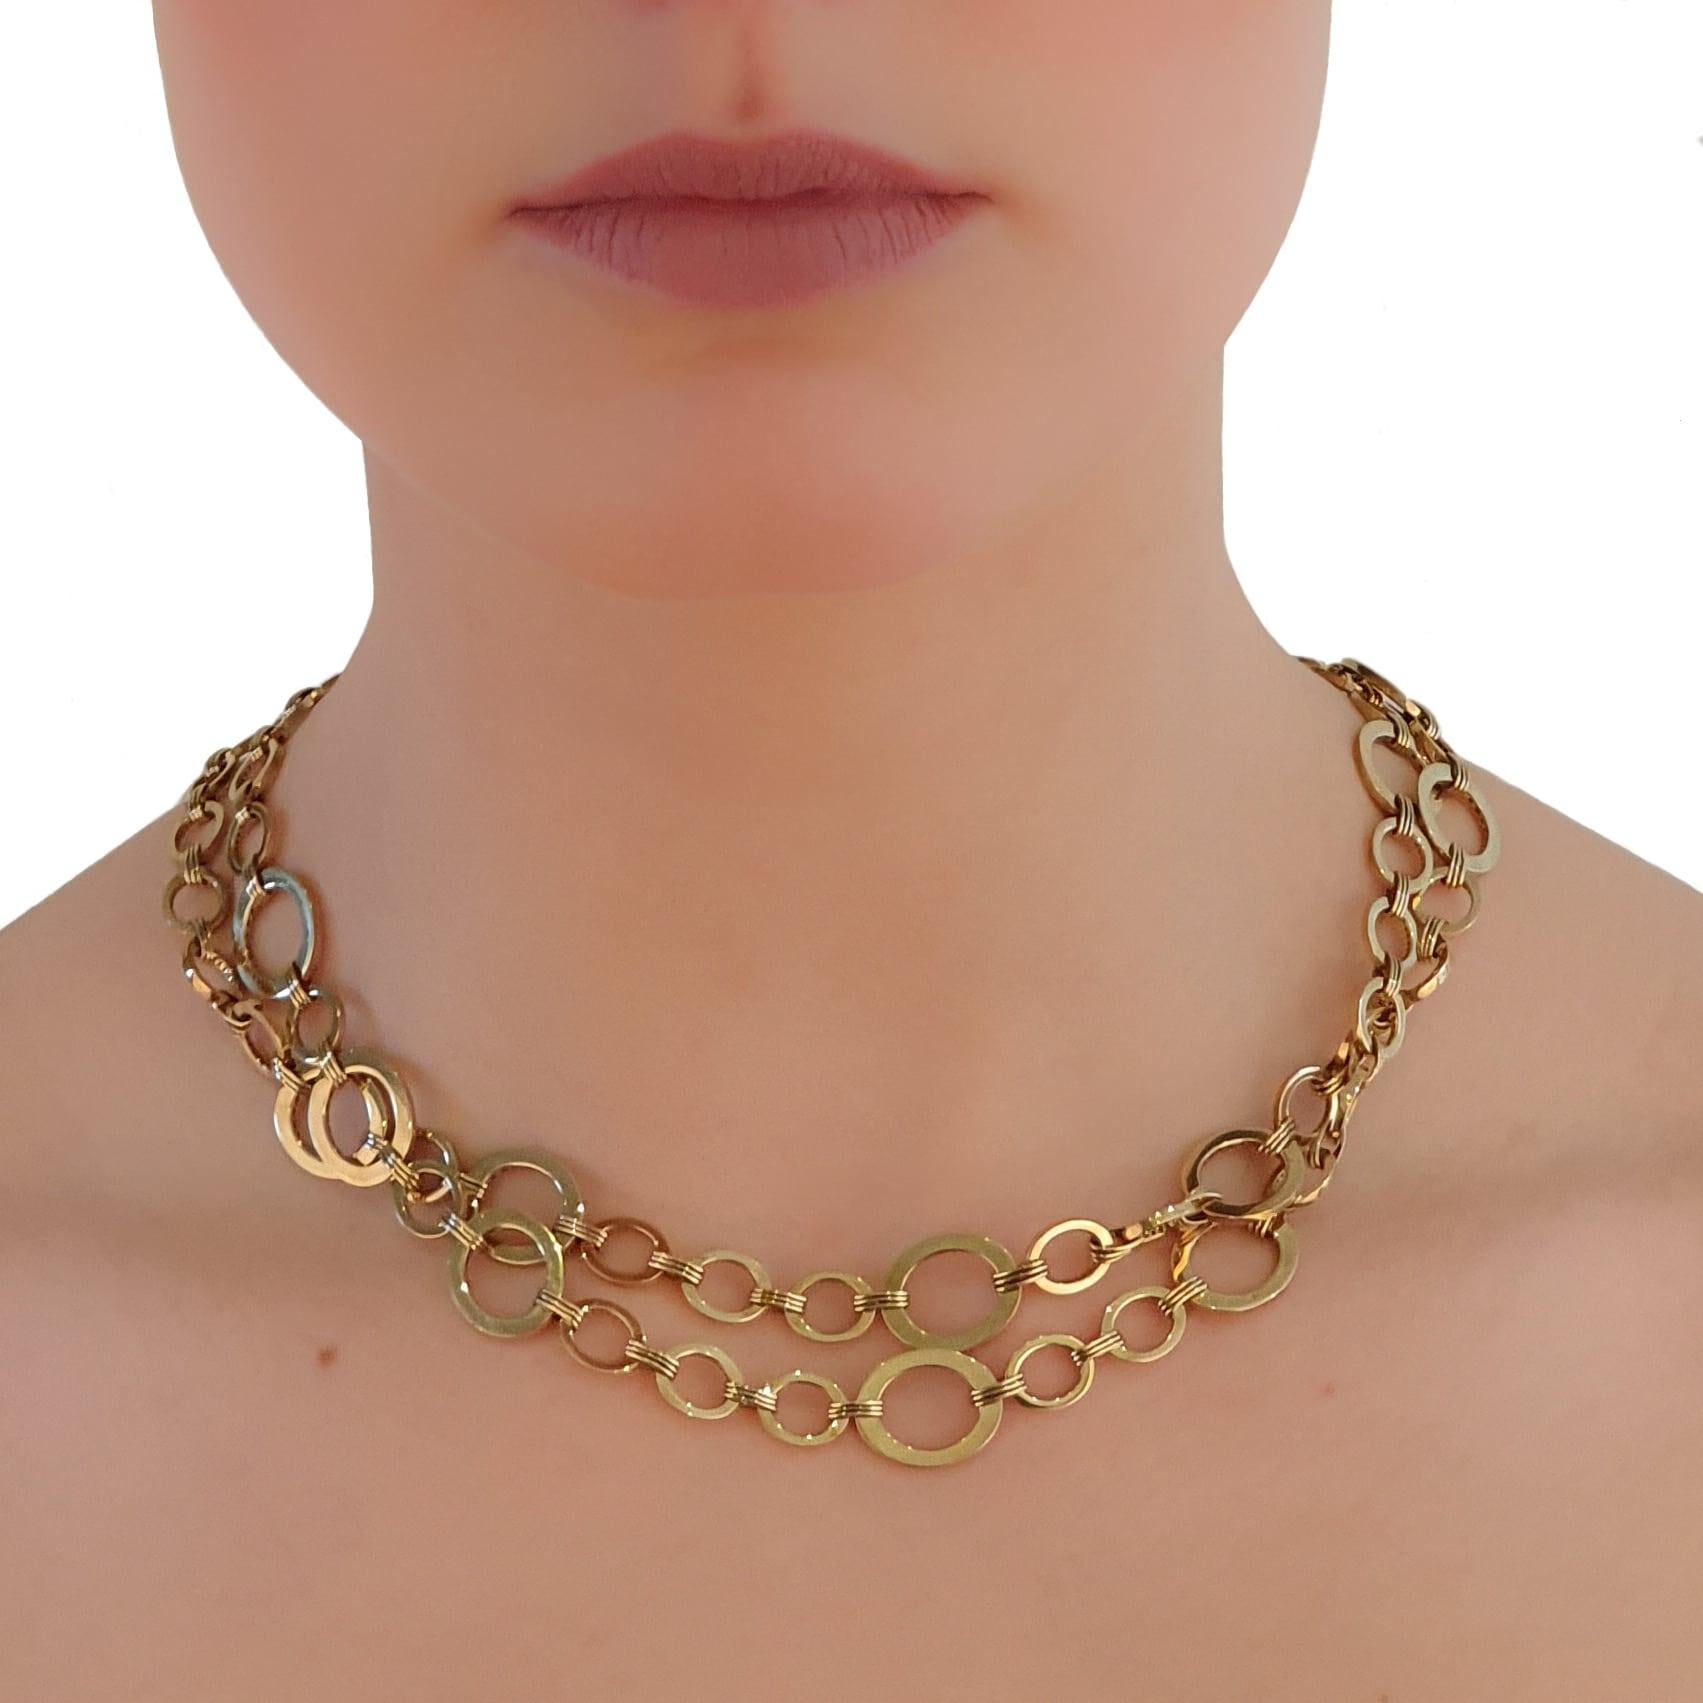 Contemporary Cober Jewellery with fantasy links 14 Carat Yellow gold necklace Available For Sale